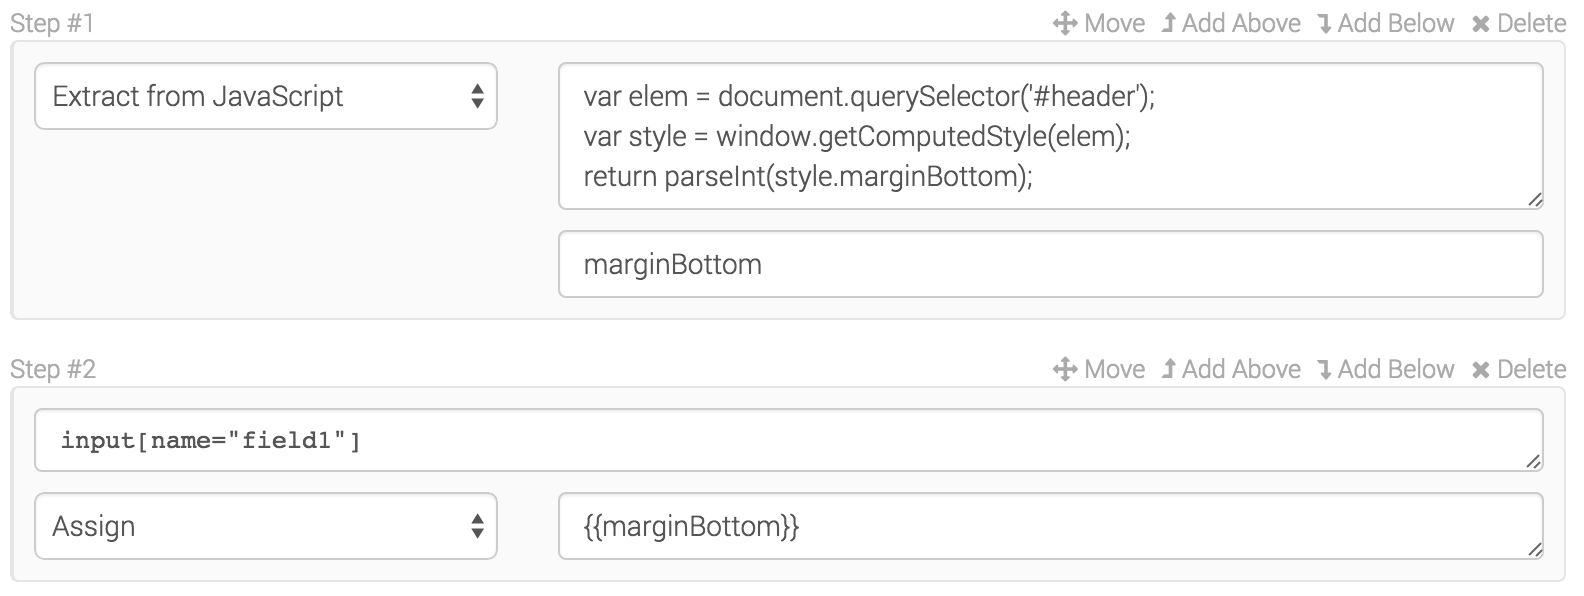 Extracting a variable from JavaScript